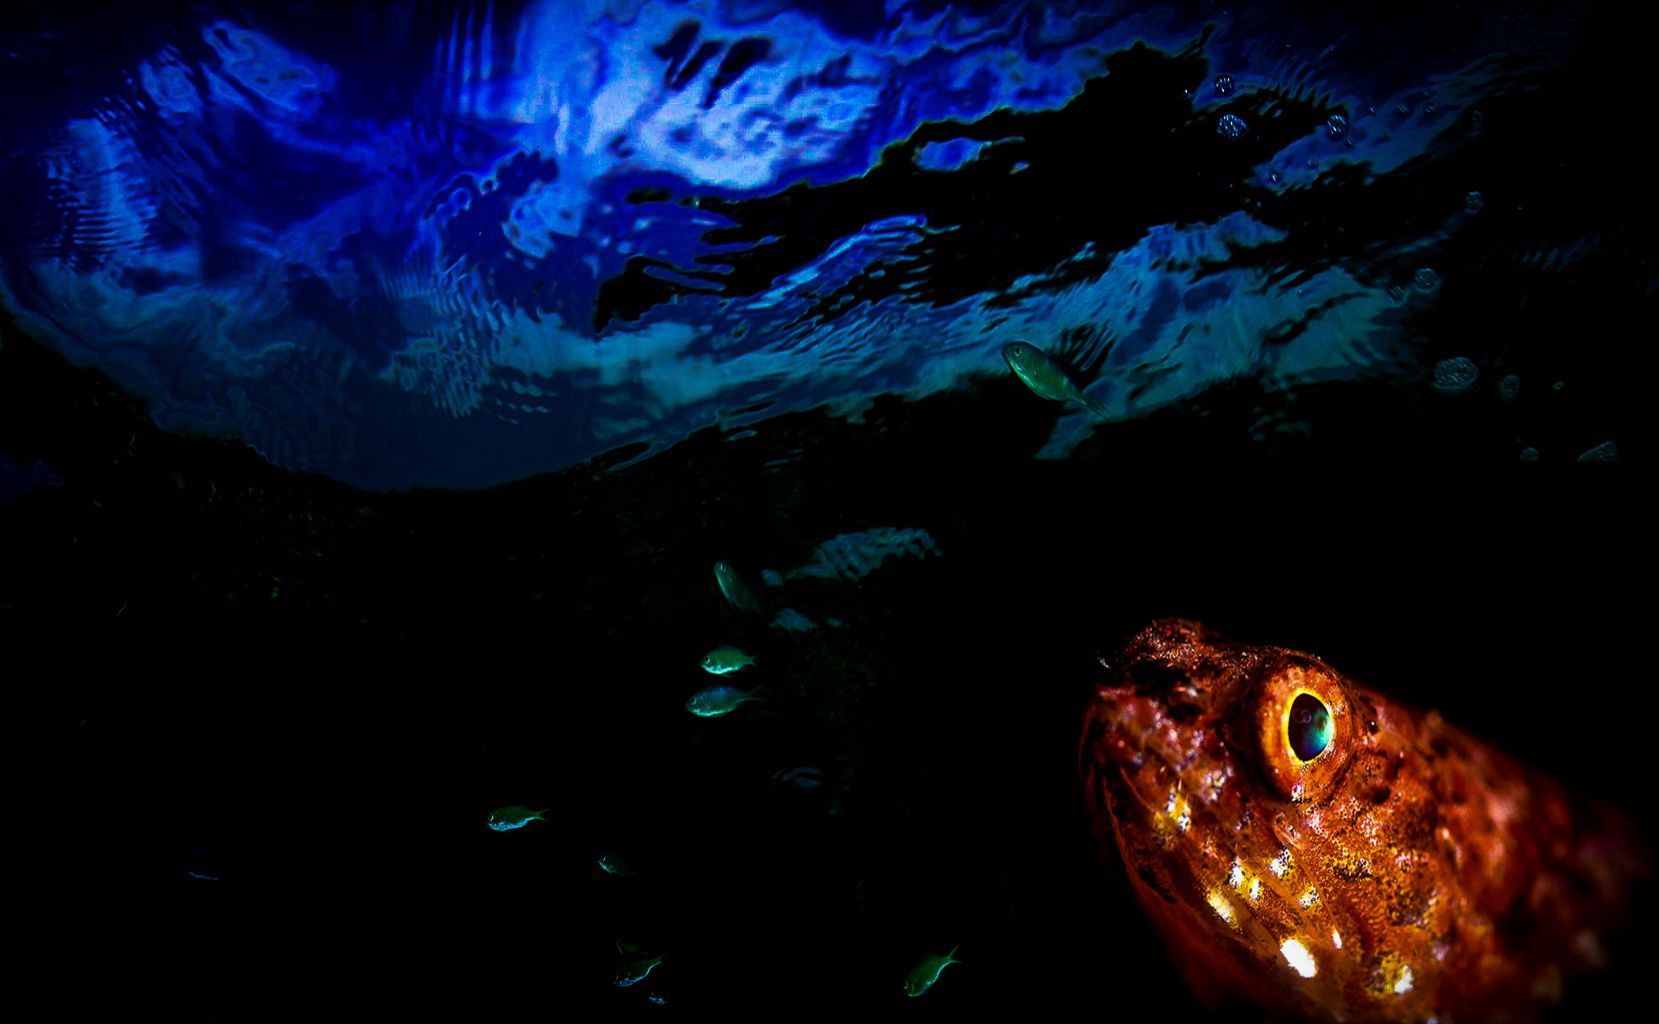 A red lizard fish under a blue ocean containing fish showing the technique of a composite image by the Fiji underwater photographer